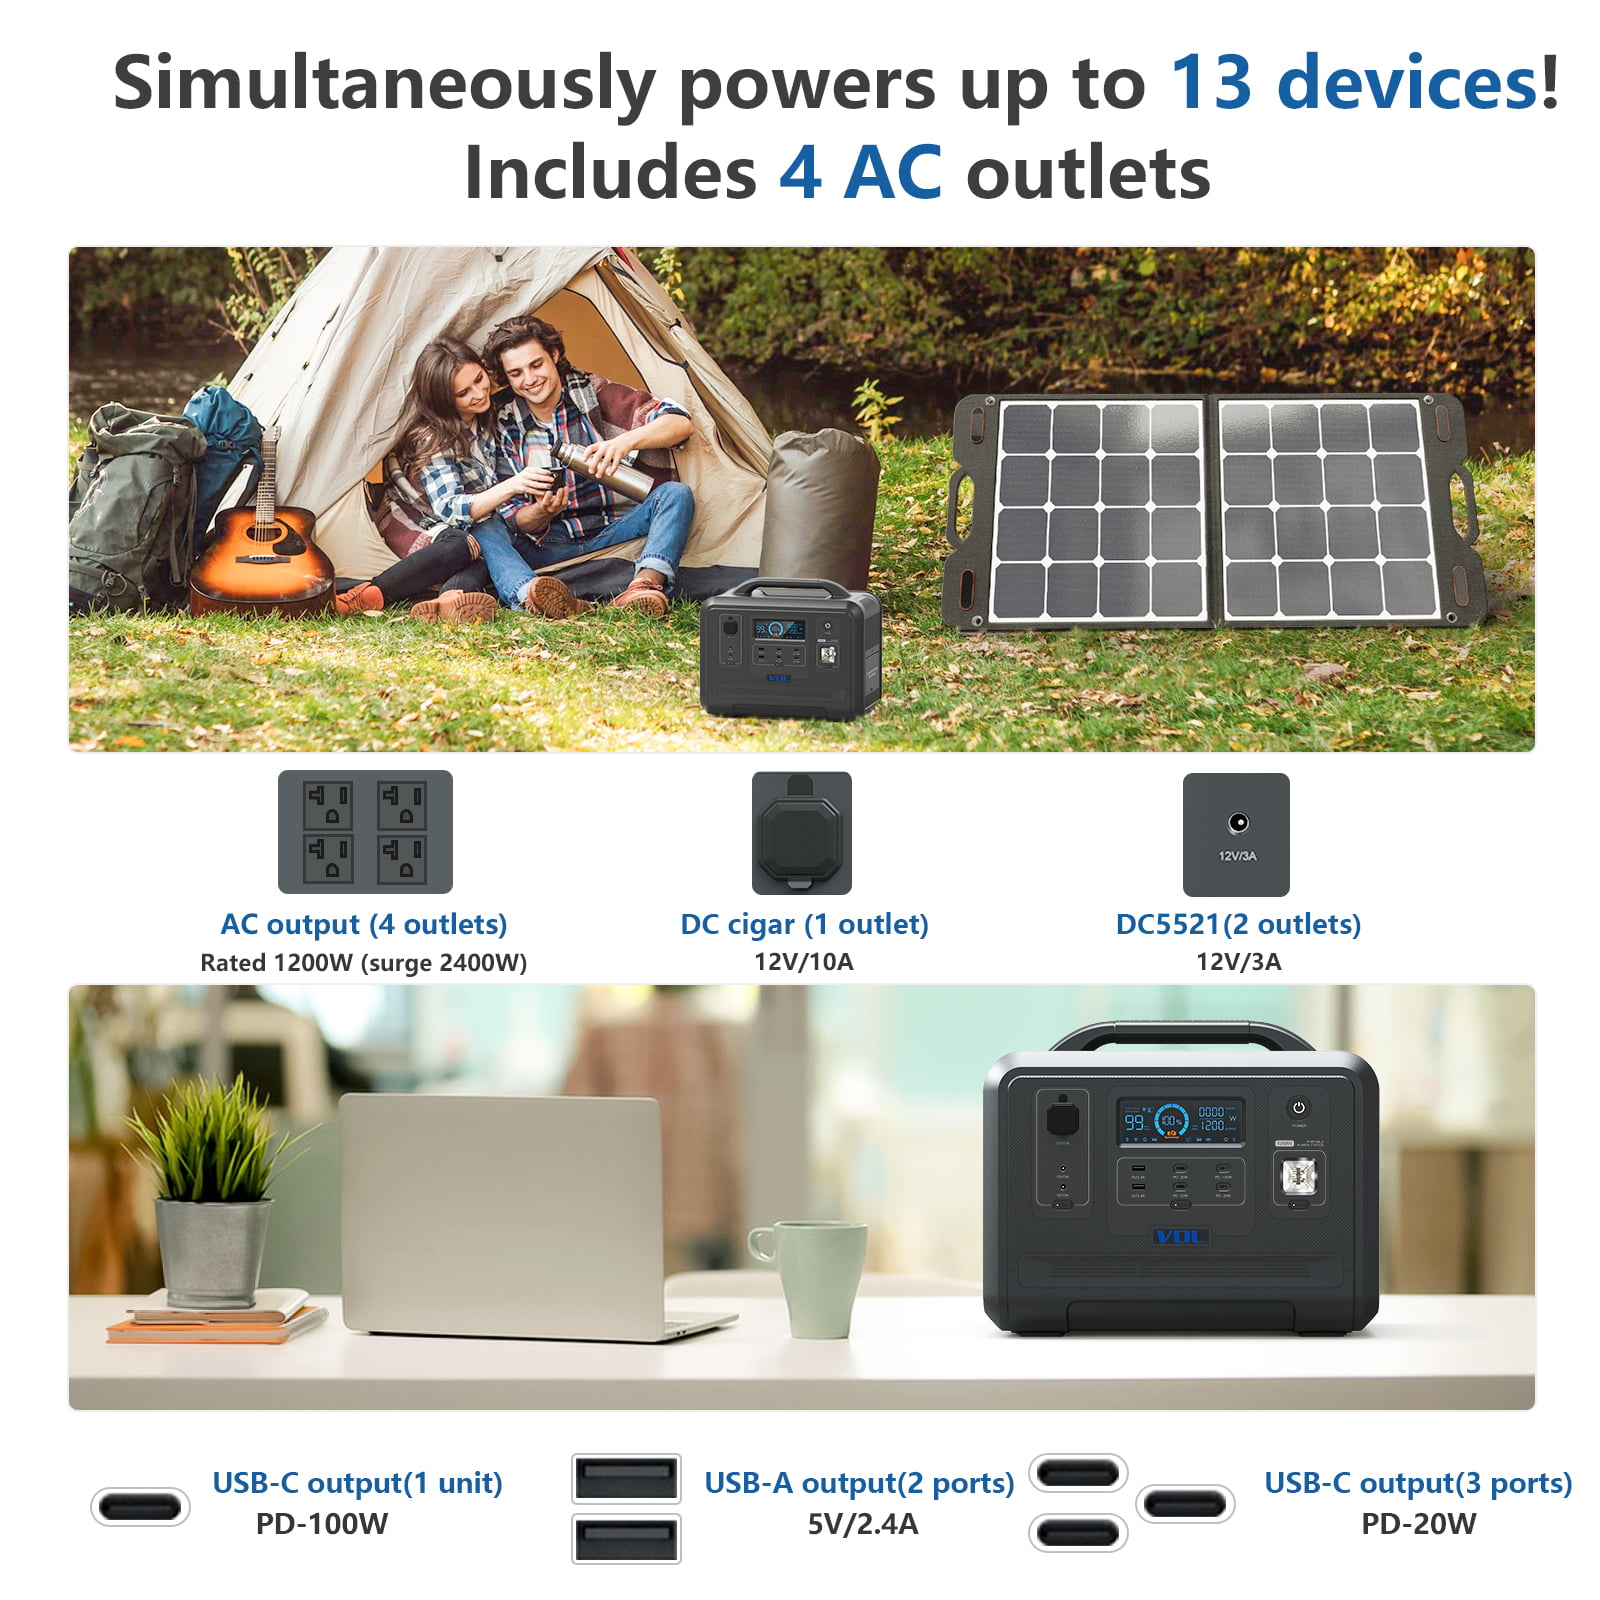 $549.99 WITH COUPON ON SITE VDL Portable Power Station 1200W/960Wh Solar  Generator, HS1200 LiFePO4 Battery Generator 3500 Cycles Fully Charged 1.5  Hours, 4x110V Pure Sine Wave AC Outlet for UPS, Outdoor, Camping